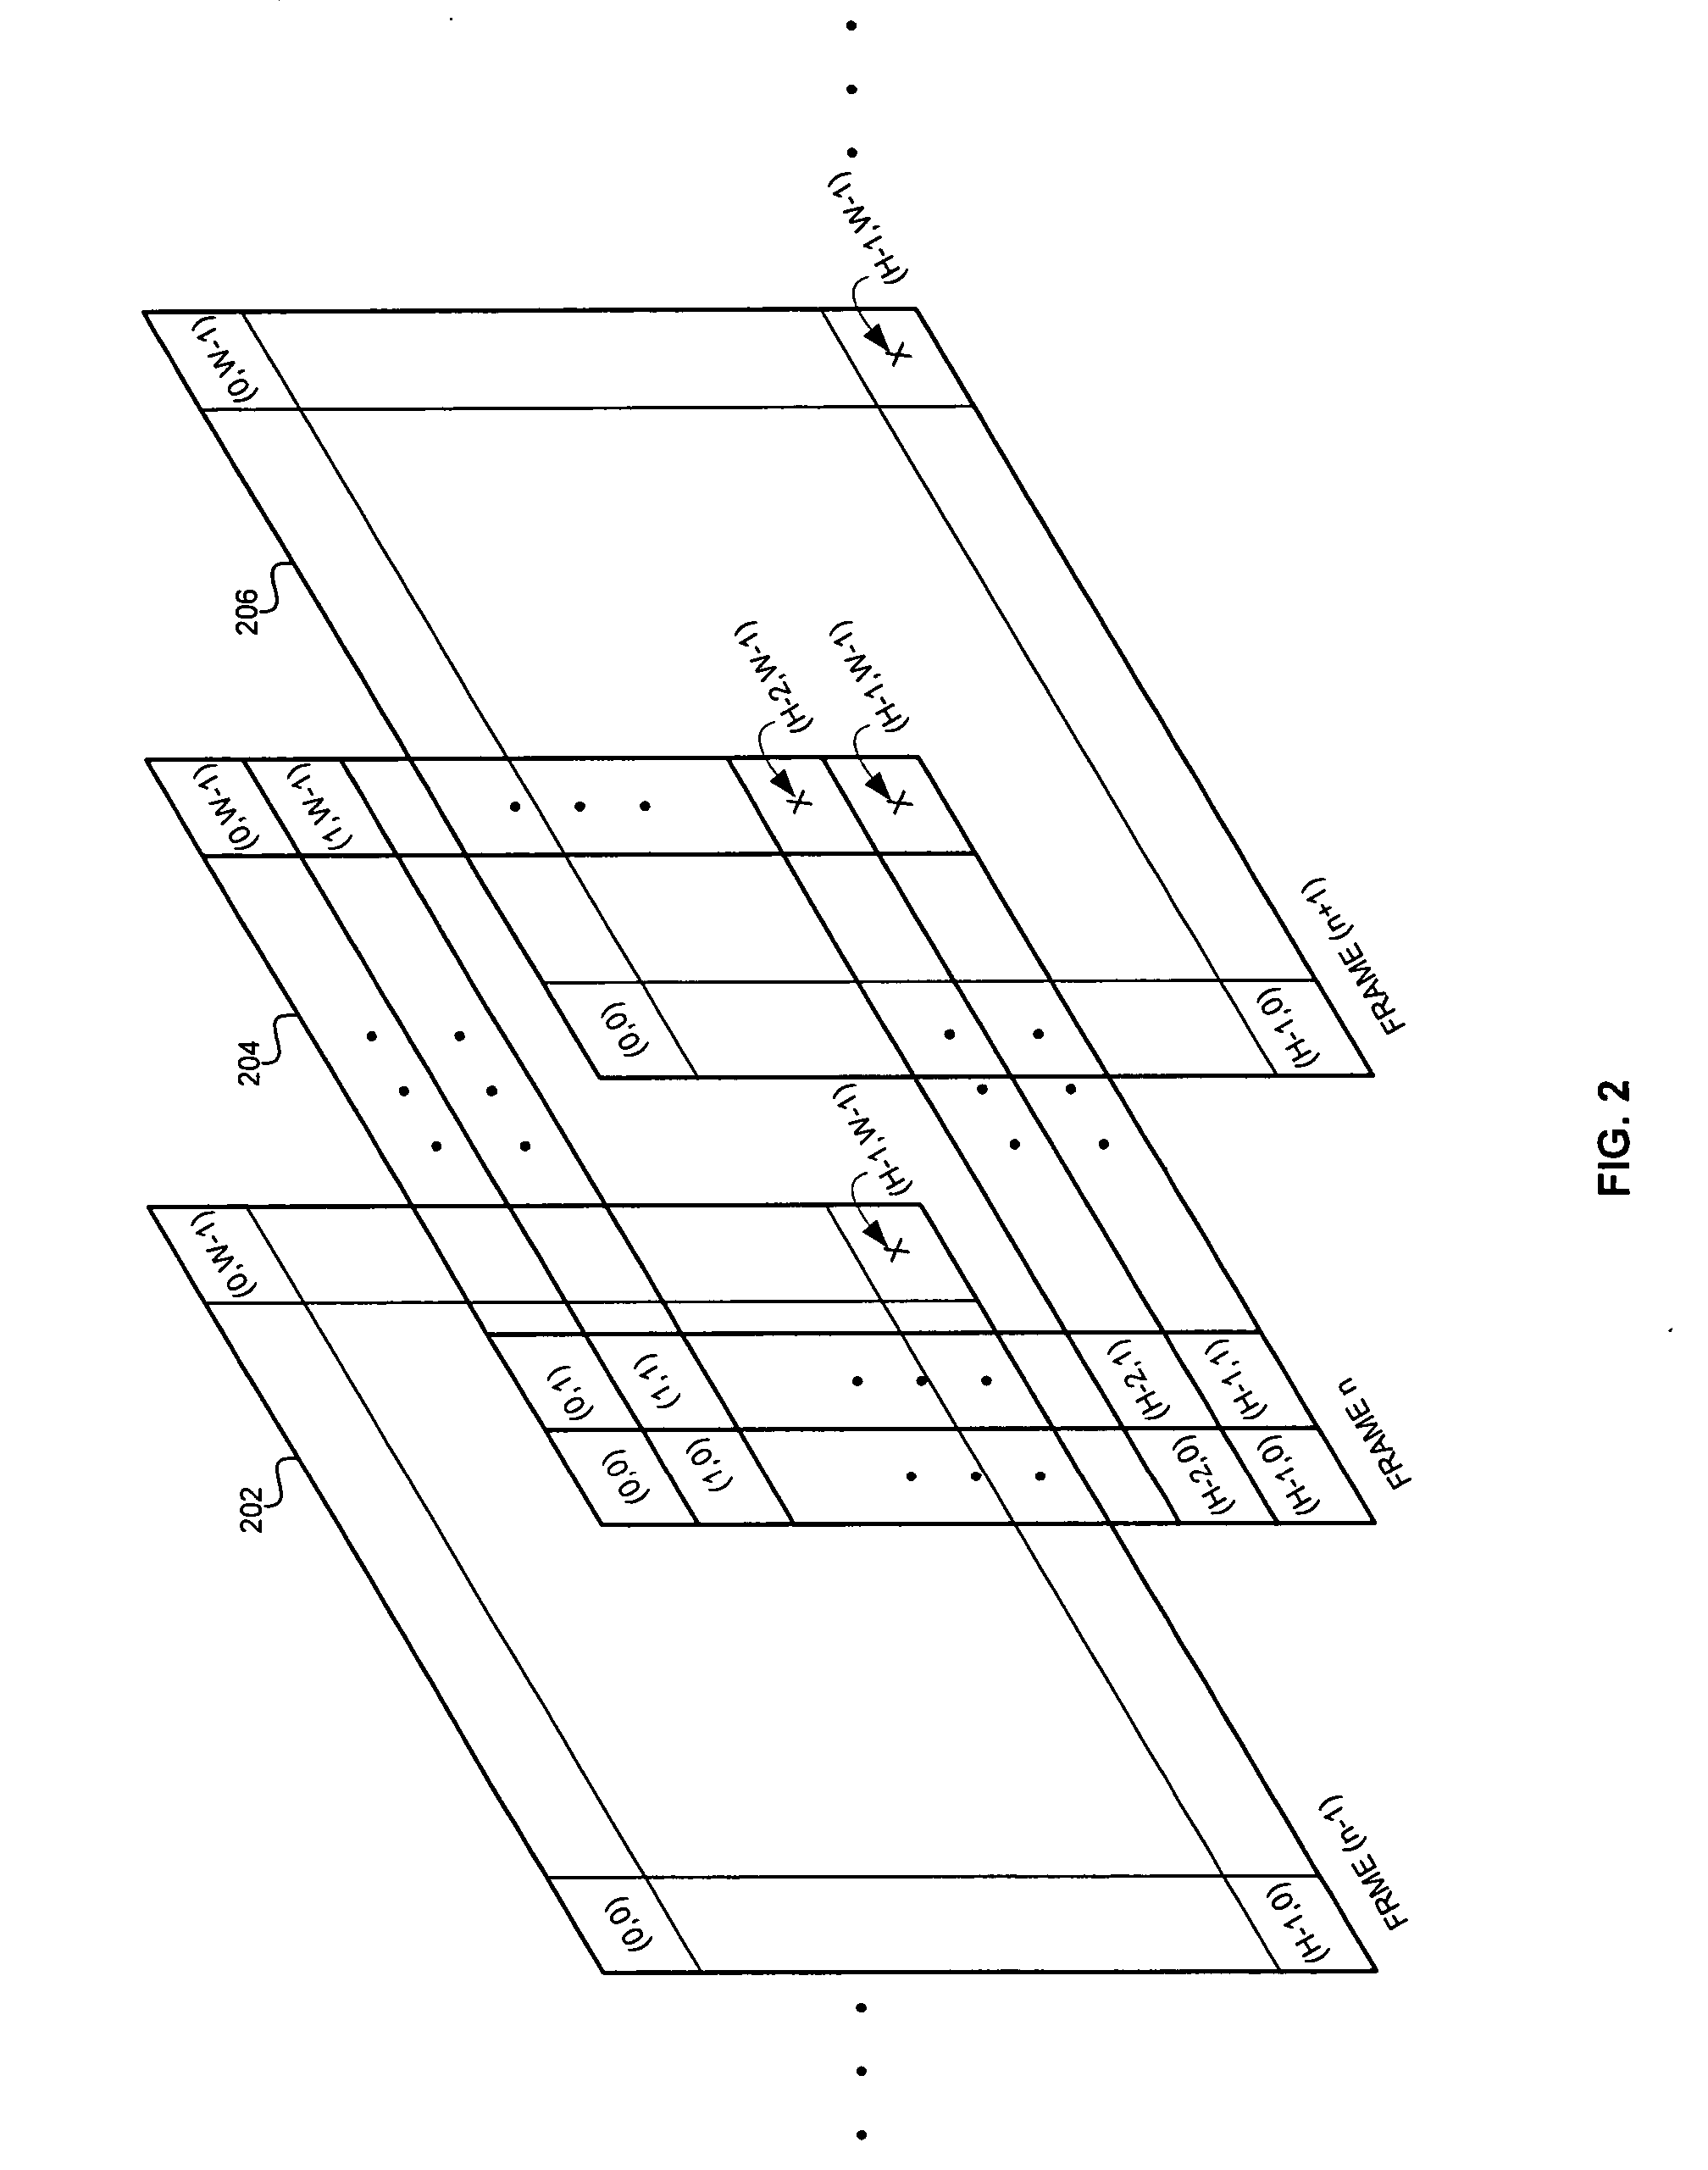 Method and system for analog video noise reduction by blending FIR and IIR filtering